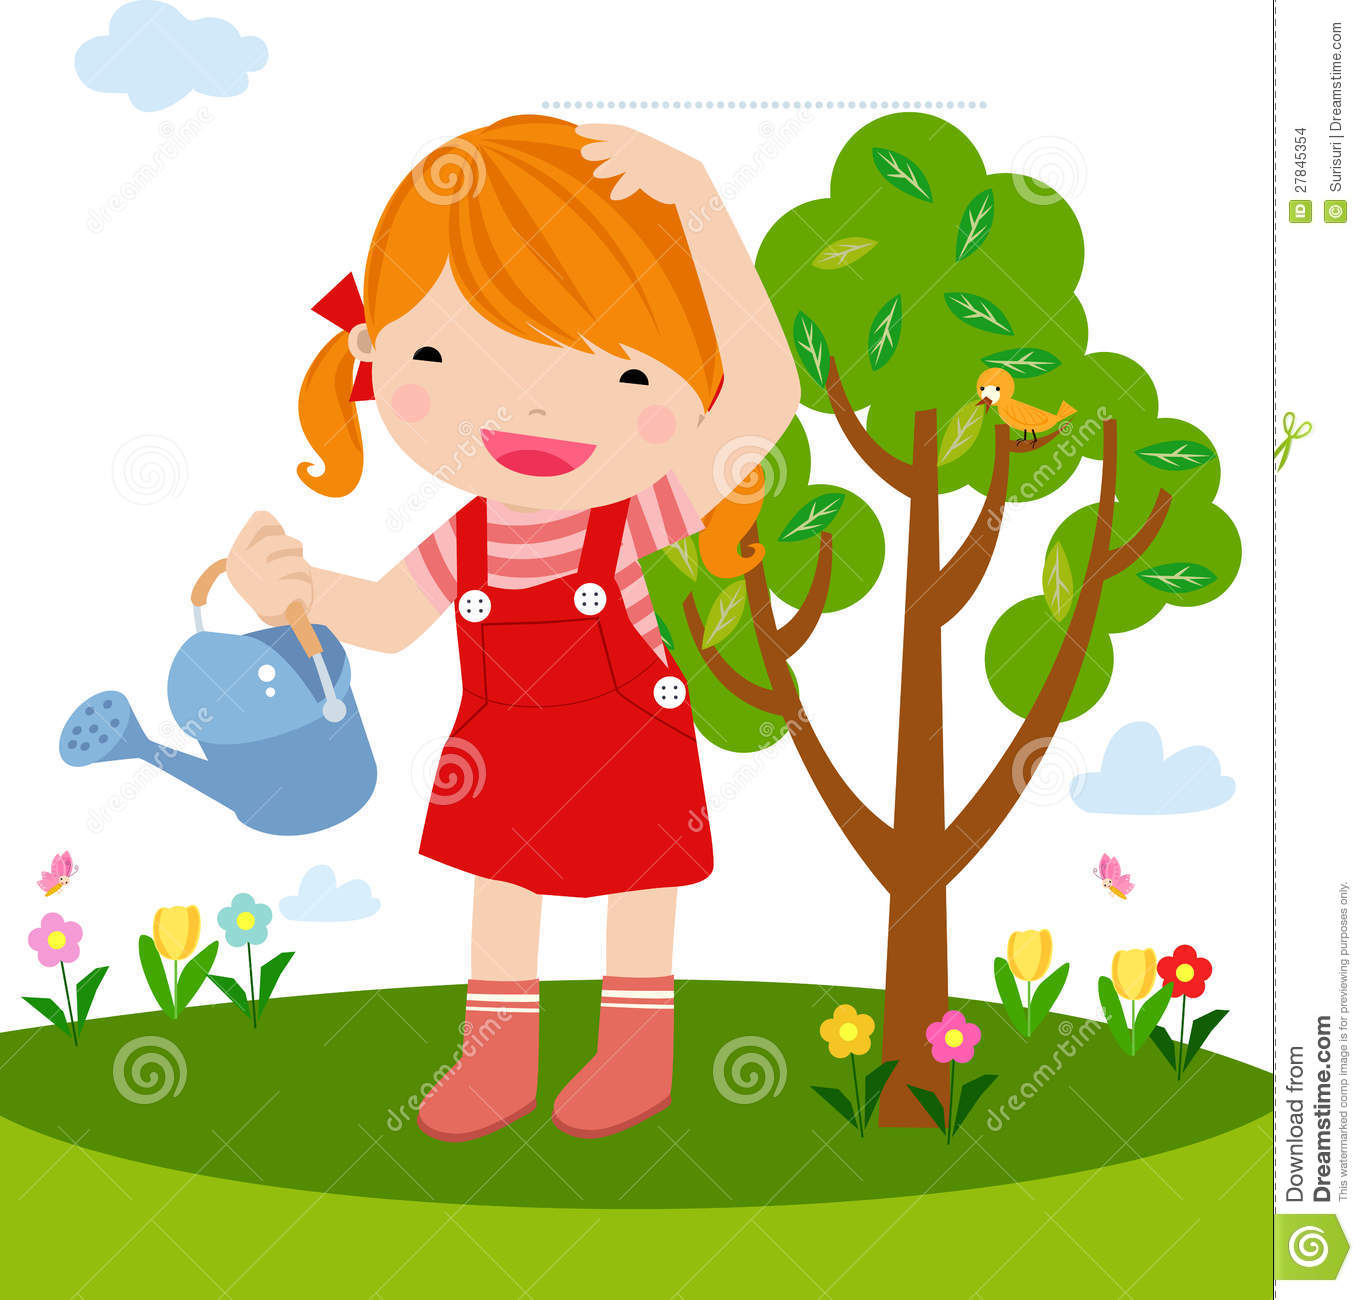 Little Girl Planting A Tree Stock Images   Image  27845354